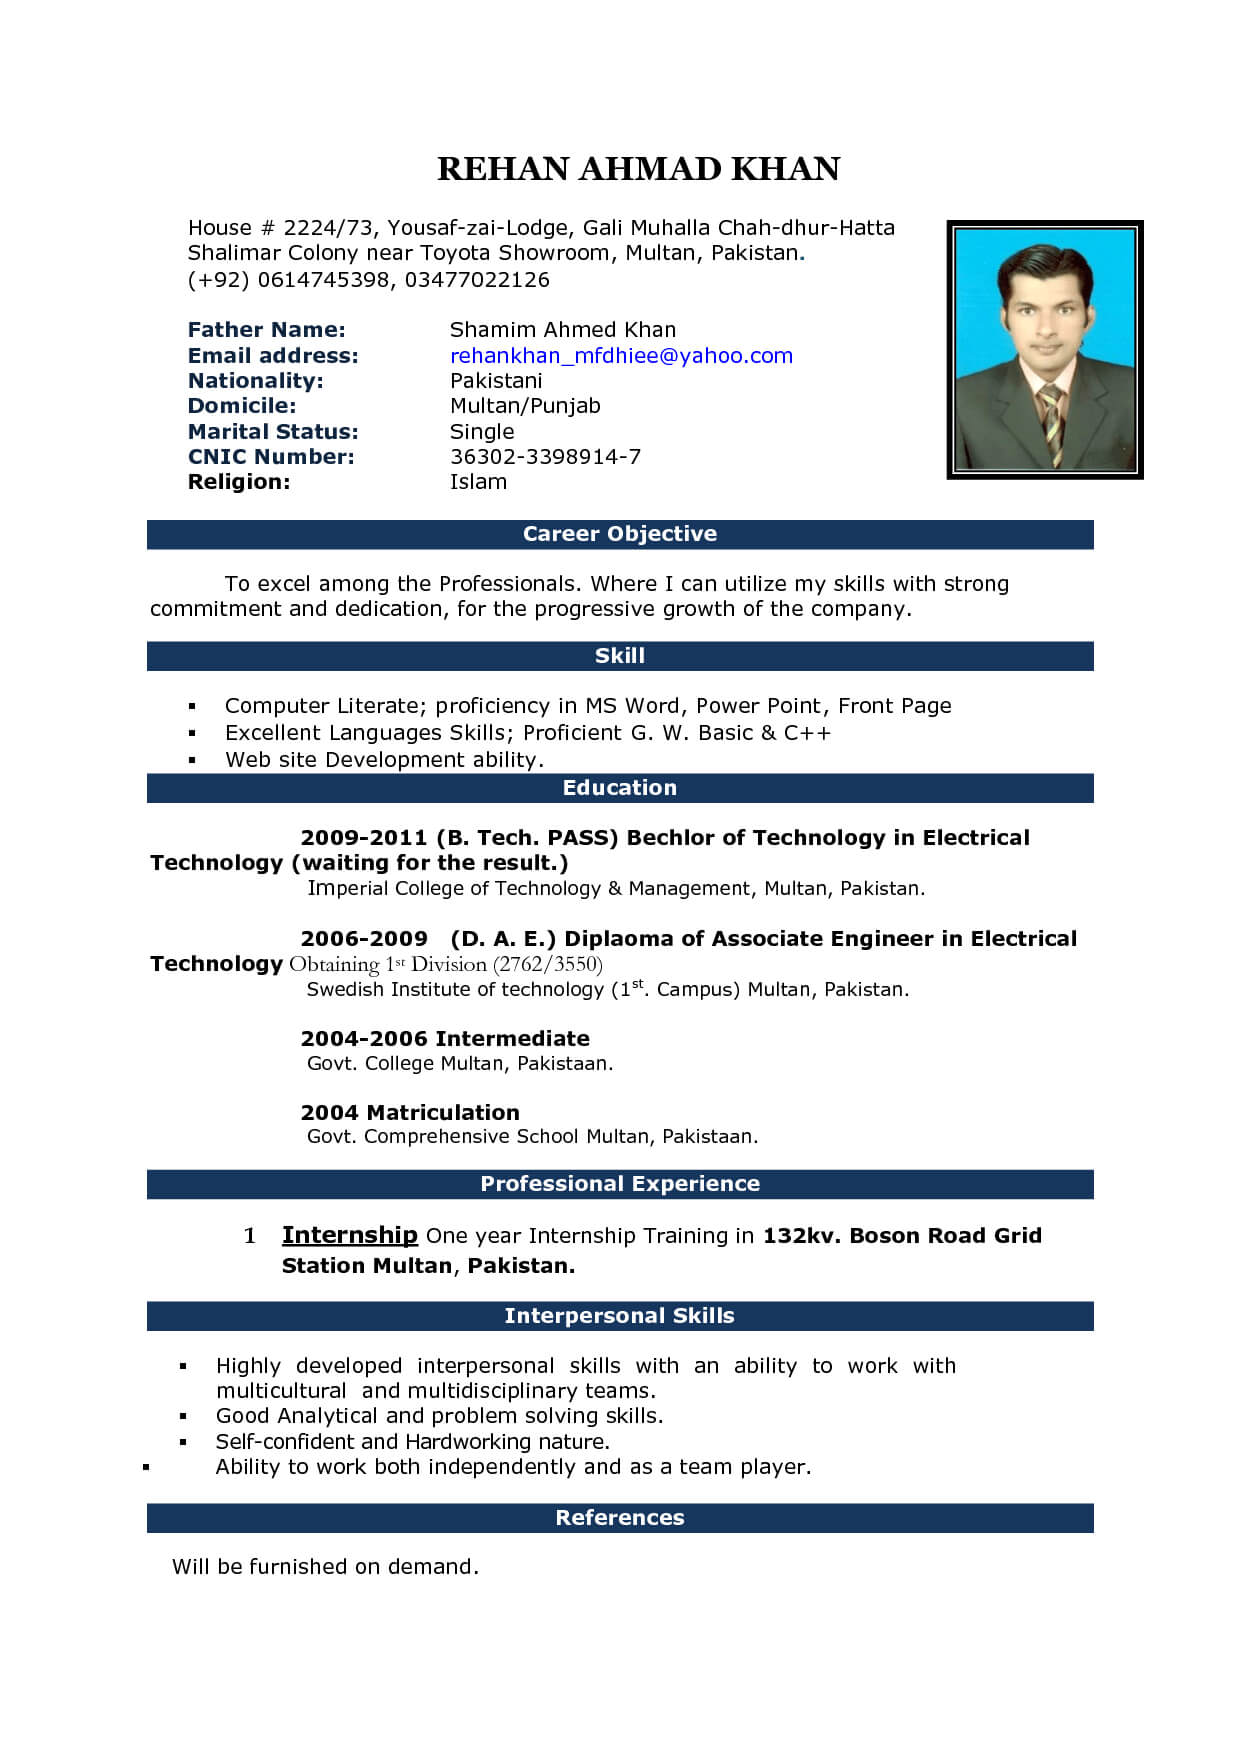 004 Curriculum Vitae Templates Microsoft Word Cv Pattern 2 Intended For Resume Templates Word 2013